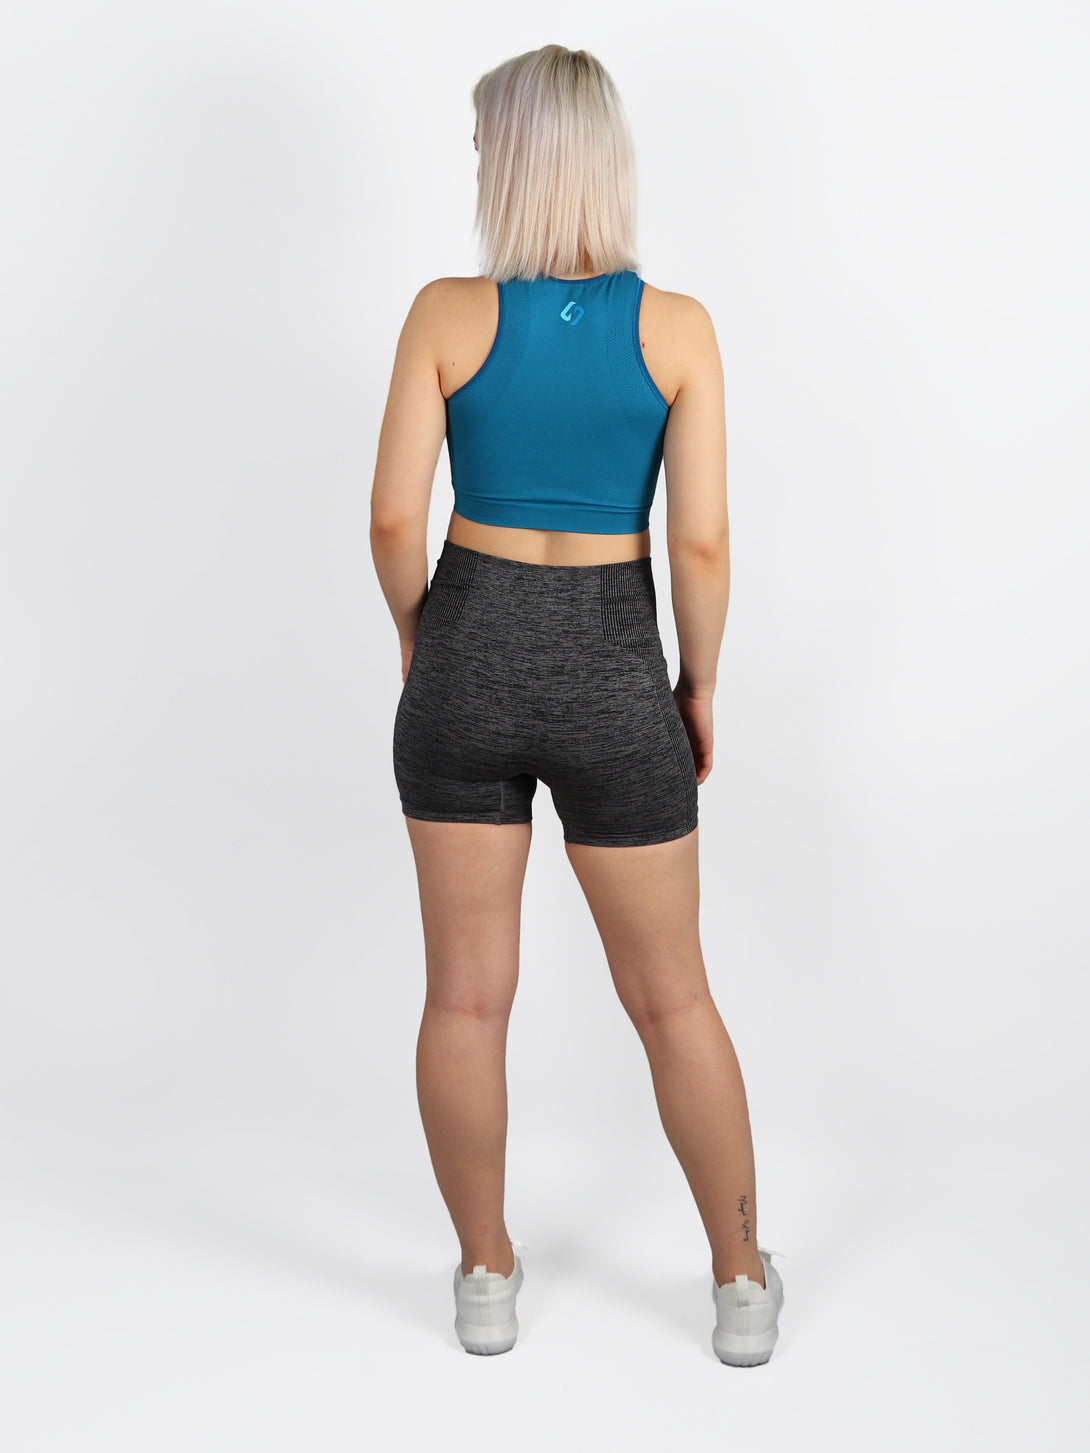 A Woman Wearing Saxony Blue Color All-Day Seamless Sleeveless Crop Top